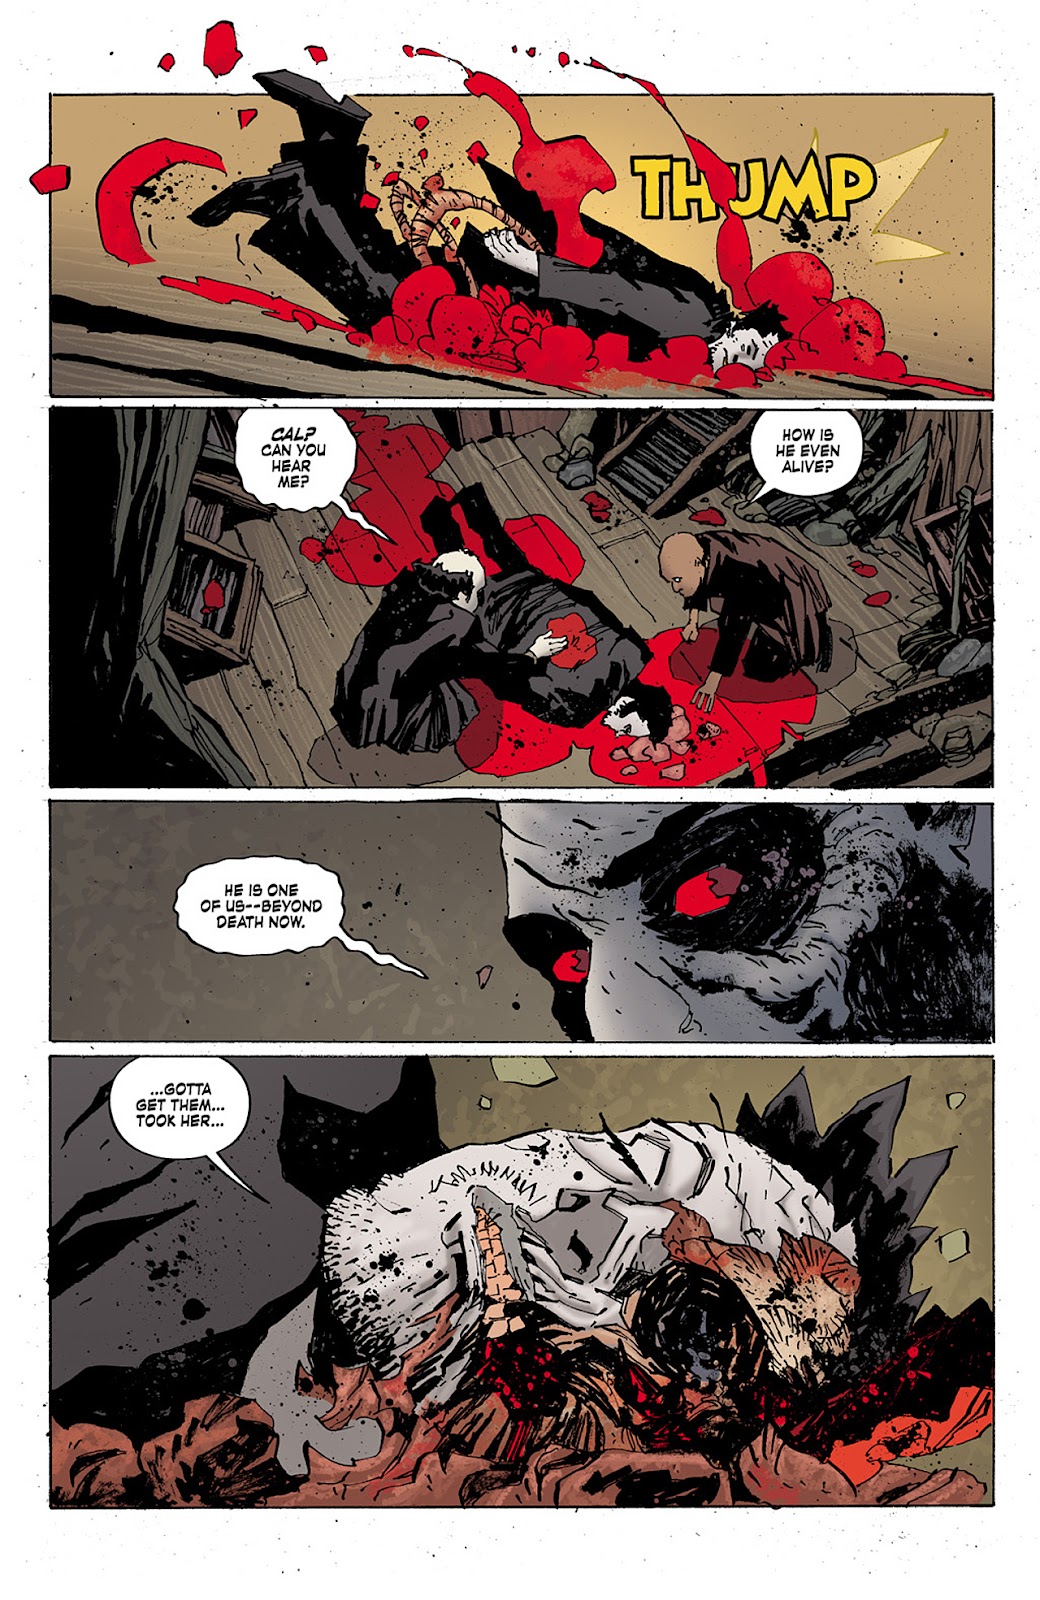 Criminal Macabre: Final Night - The 30 Days of Night Crossover issue 4 - Page 4